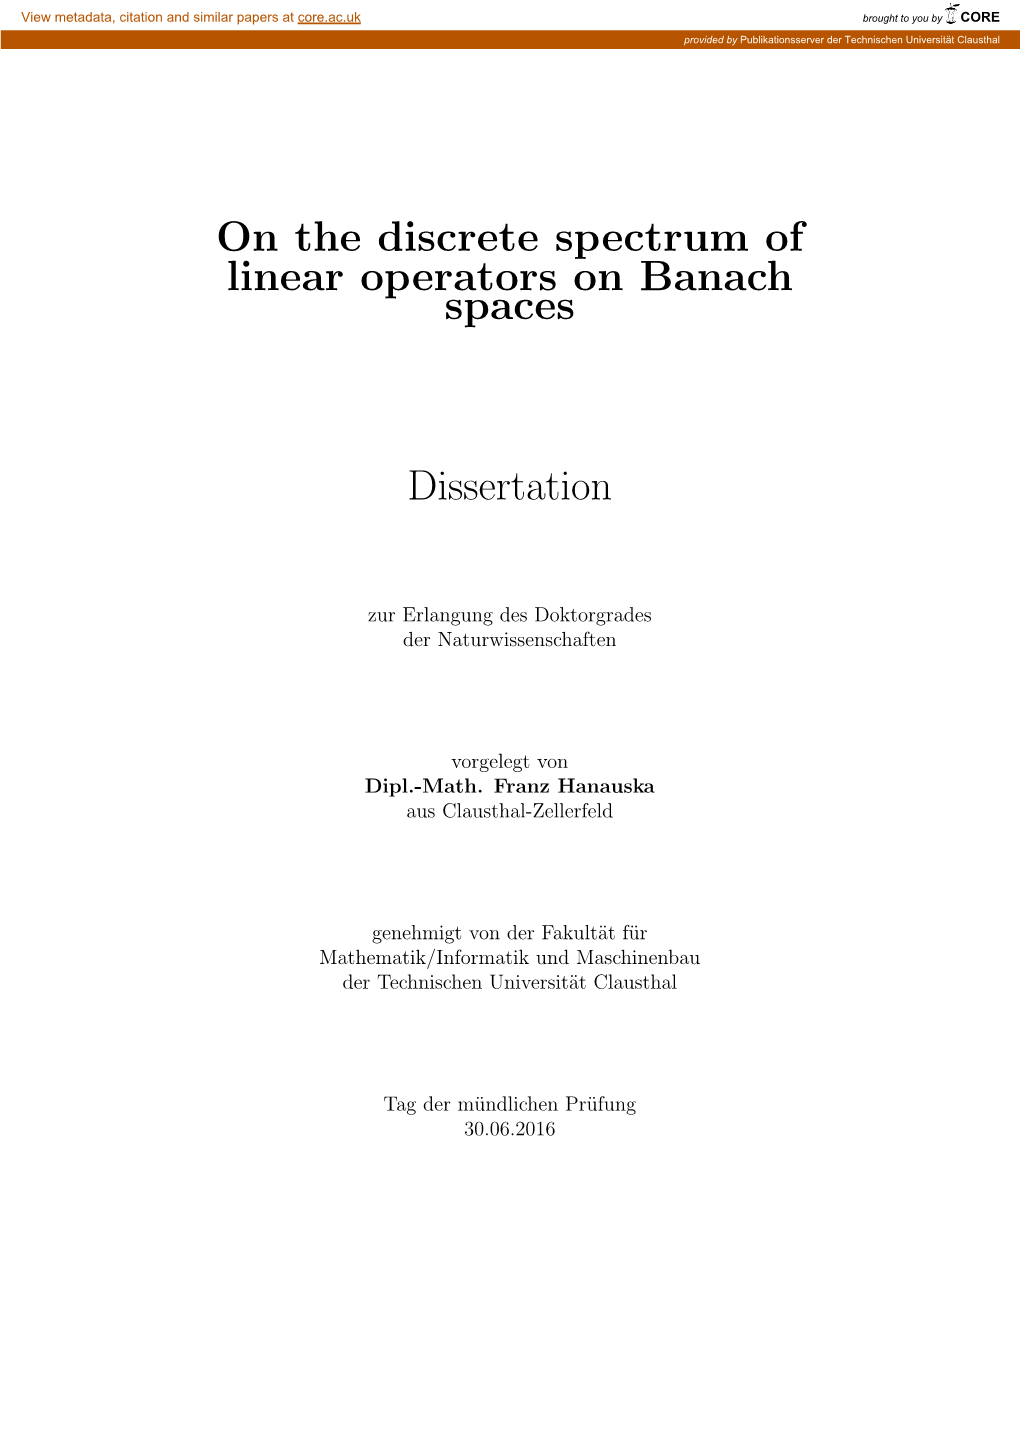 On the Discrete Spectrum of Linear Operators on Banach Spaces